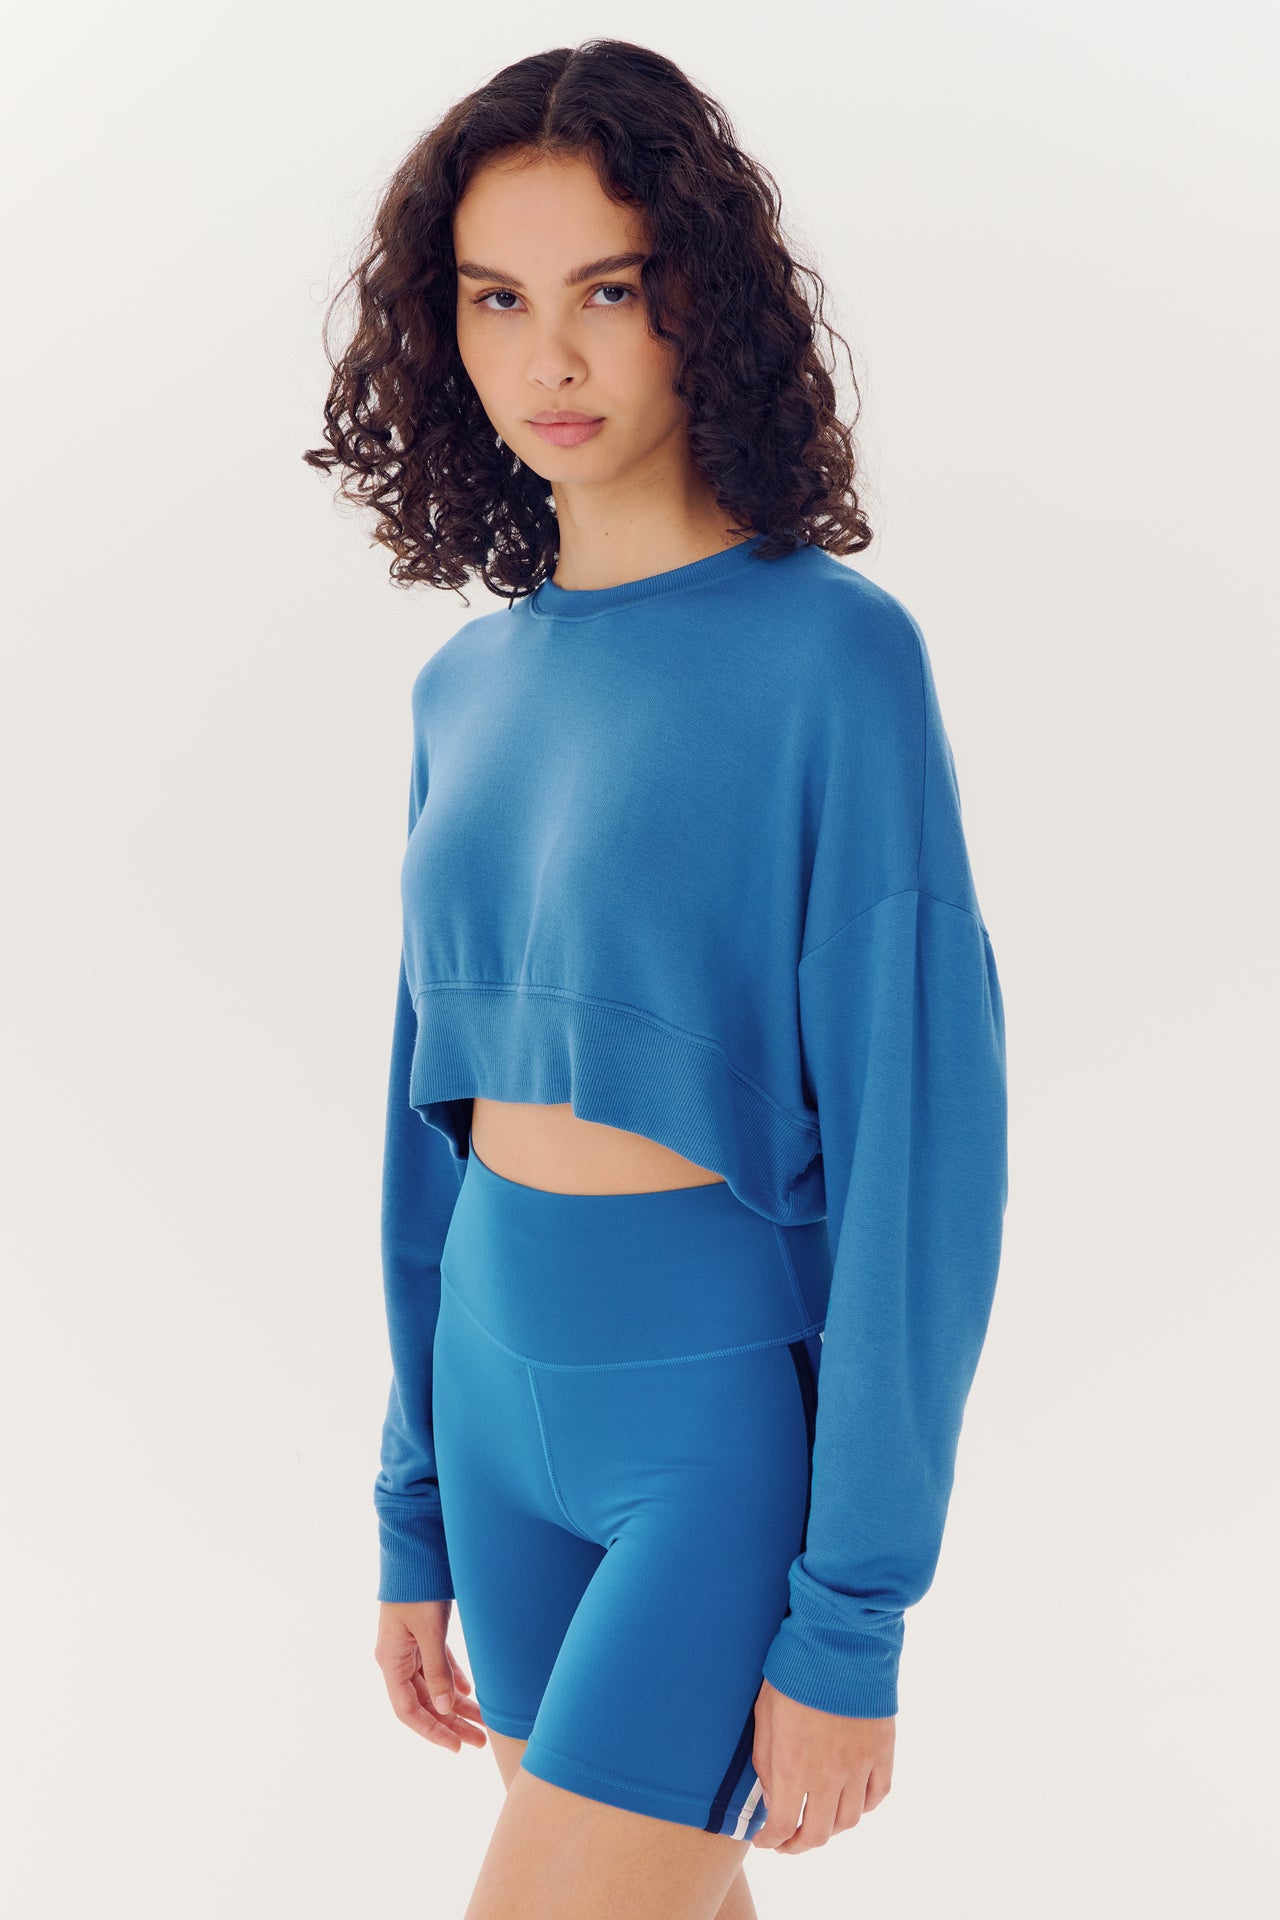 Woman posing in a Noah Fleece Crop Sweatshirt - Stone Blue and matching shorts made from modal spandex blend, by SPLITS59, against a white background.